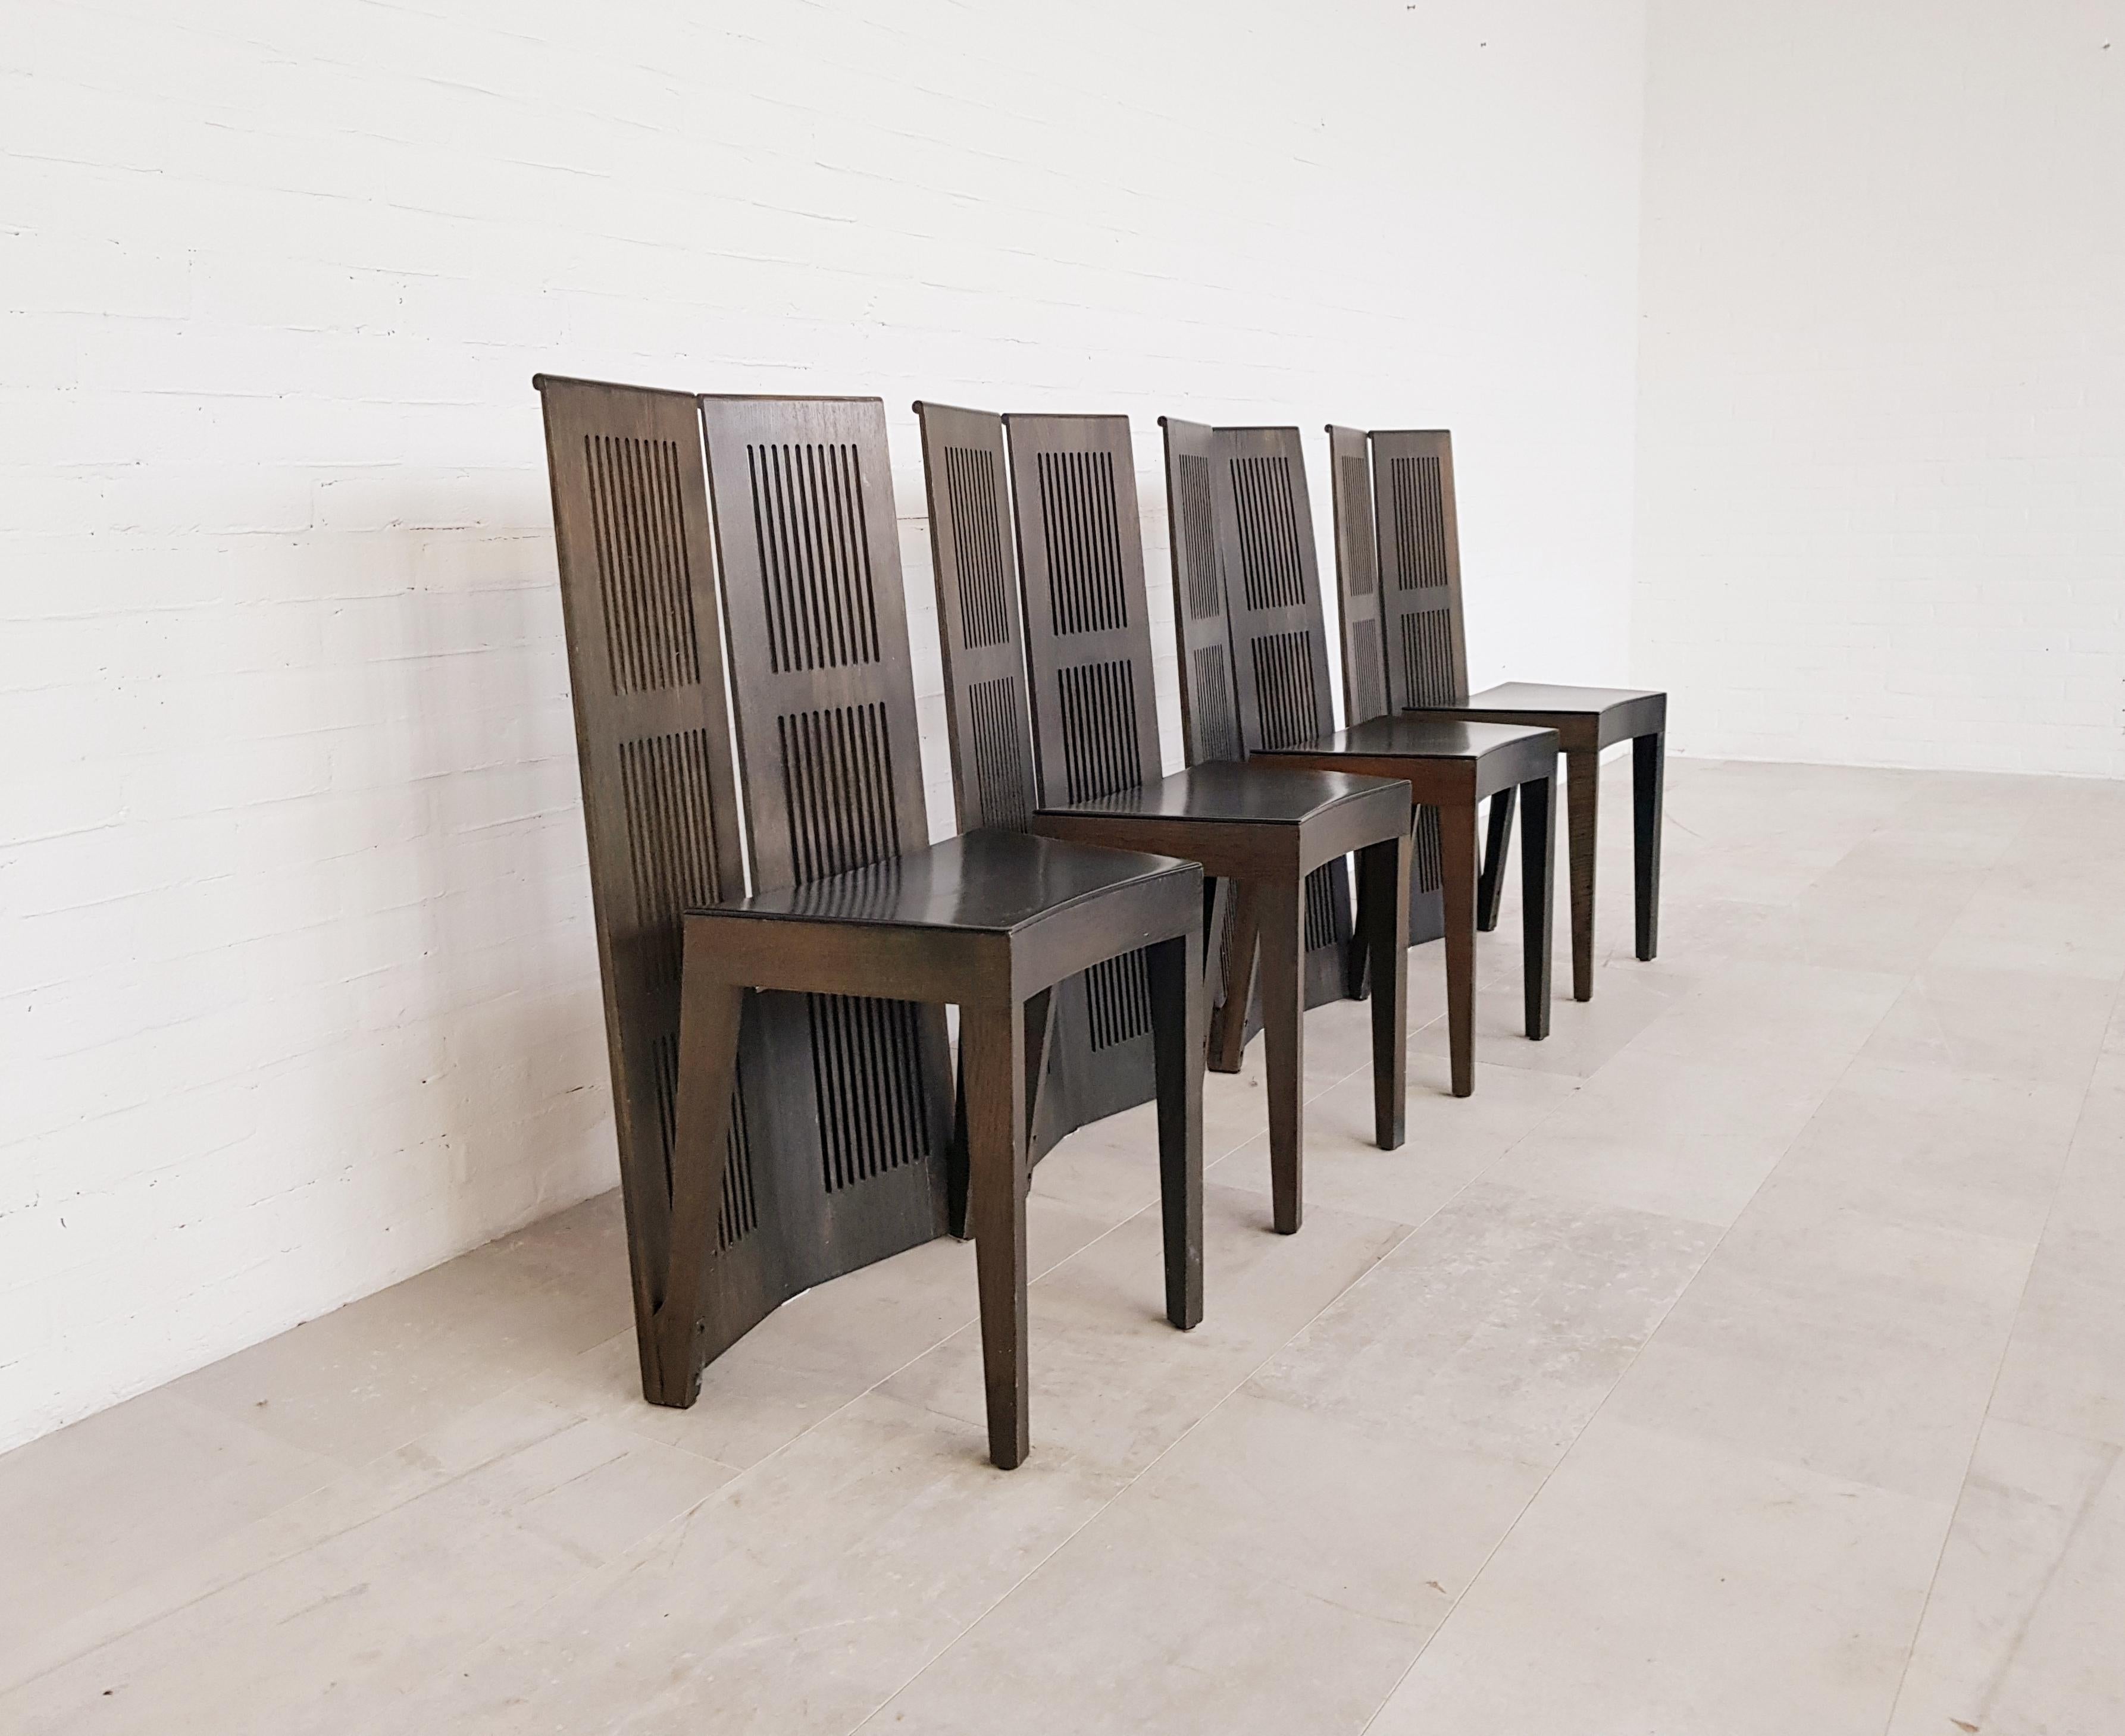 Postmodern Lubekka chairs for Cassina. Designed by Italian architect and designer Andrea Branzi in 1970. The chairs are made in brown wood with black leather seat. The chairs are designed to stand together or separately. The chairs are in excellent